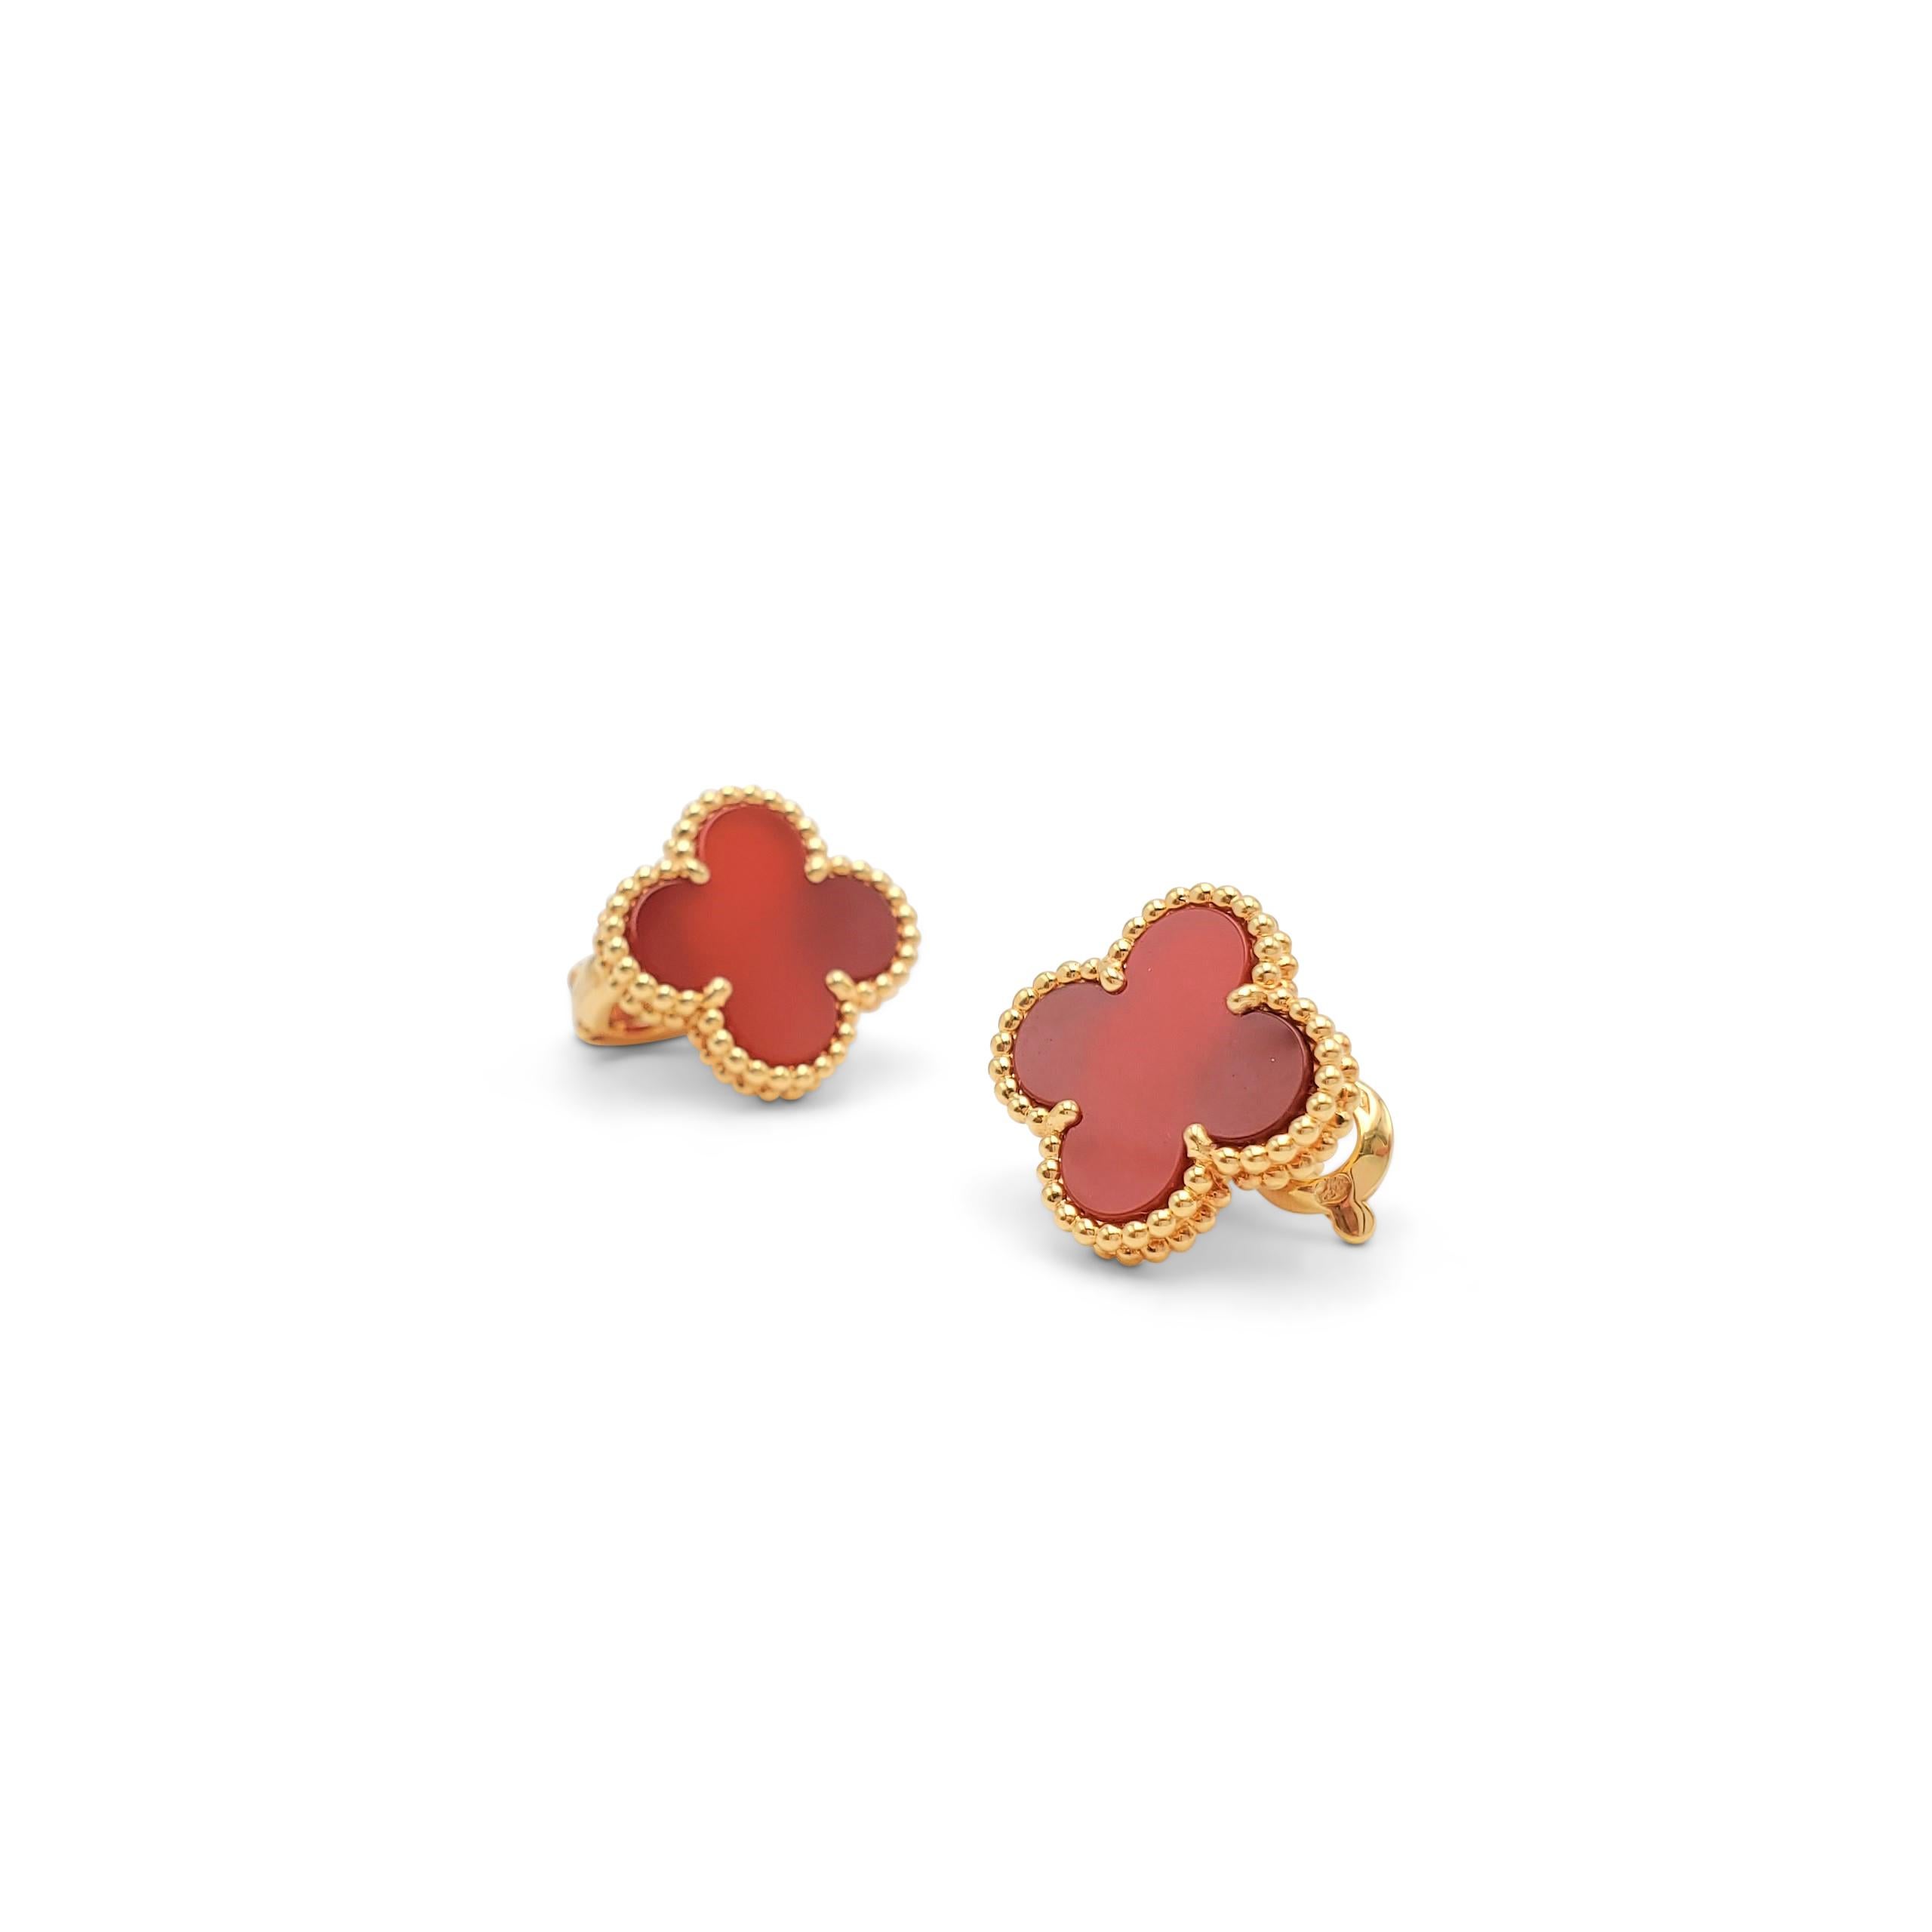 Authentic Van Cleef & Arpels 'Vintage Alhambra' earrings crafted in 18 karat yellow gold featuring the cover leaf-inspired motif in carnelian. Signed VCA, Au750,  with serial number and hallmarks. The earrings are presented with the original box or